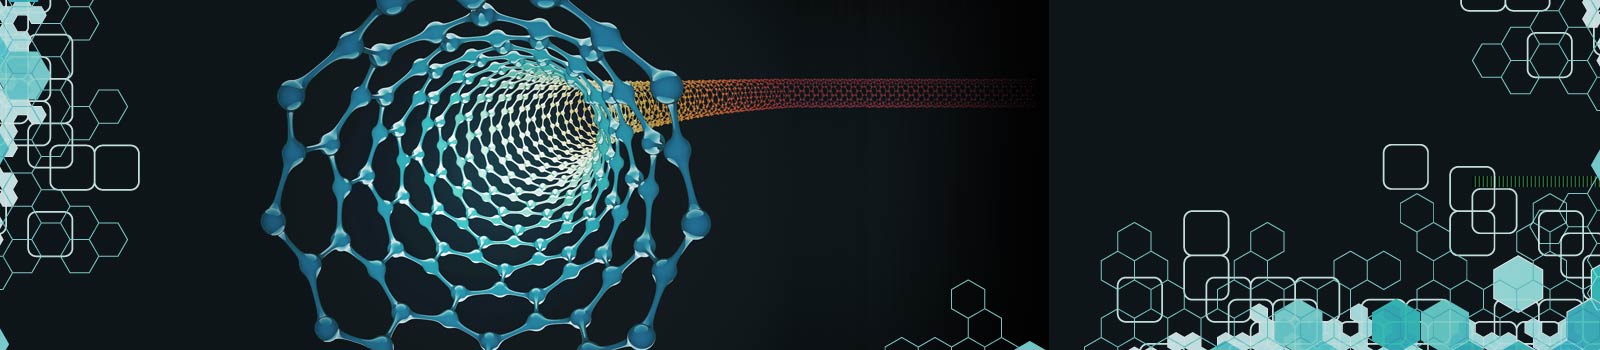 Nano-C Products: Carbon Nanotubes - Materials that power our world